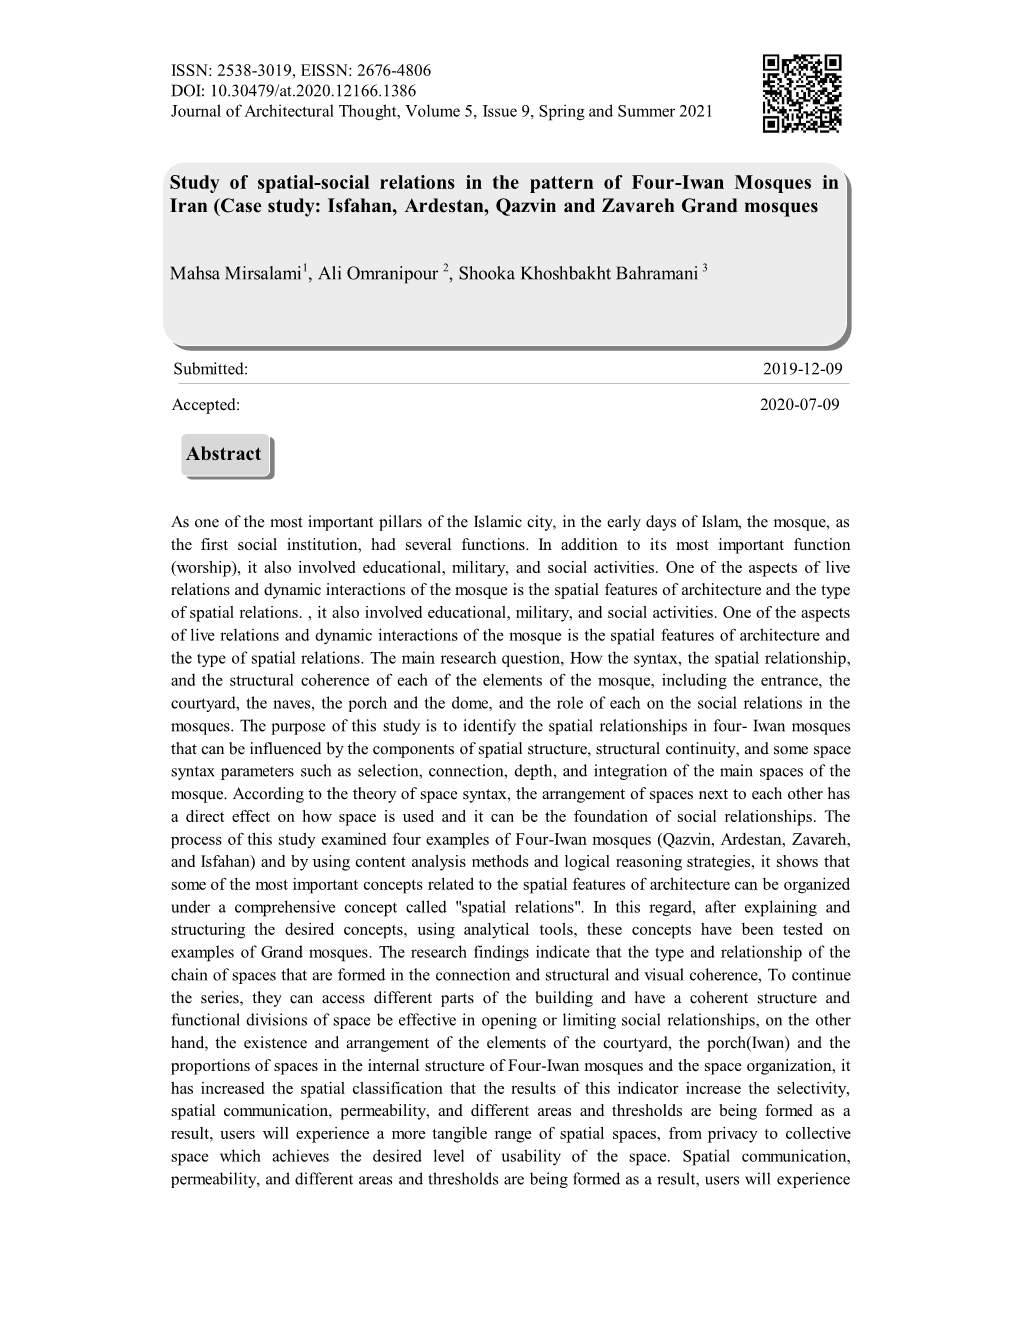 Study of Spatial-Social Relations in the Pattern of Four-Iwan Mosques in Iran (Case Study: Isfahan, Ardestan, Qazvin and Zavareh Grand Mosques